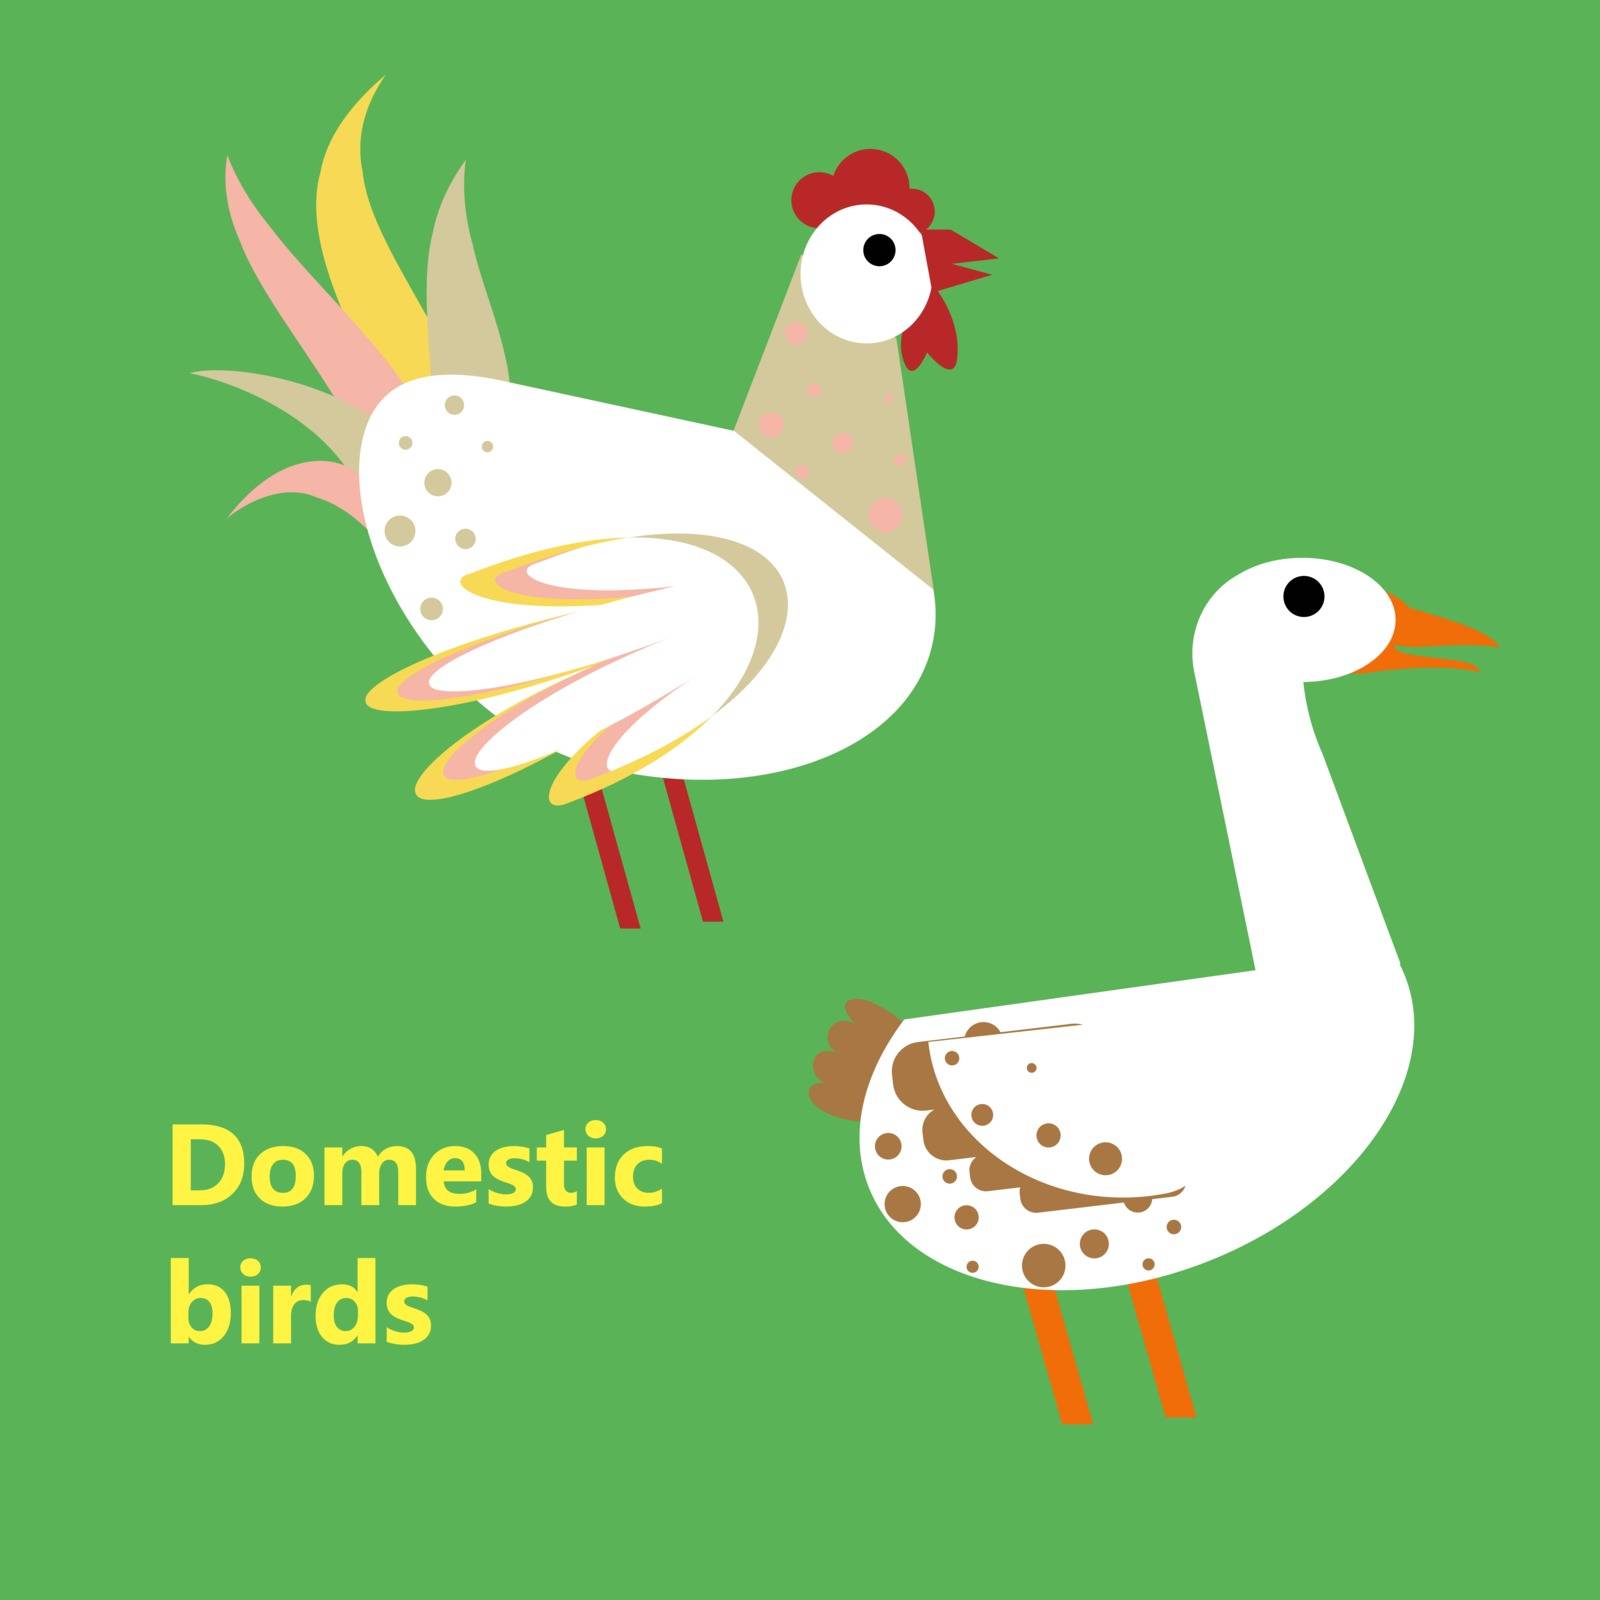 The Domestic birds rooster and goose on simple color background. Educational flashcard for teaching preschool in kindergarten. Colorful flat cartoon style illustration.